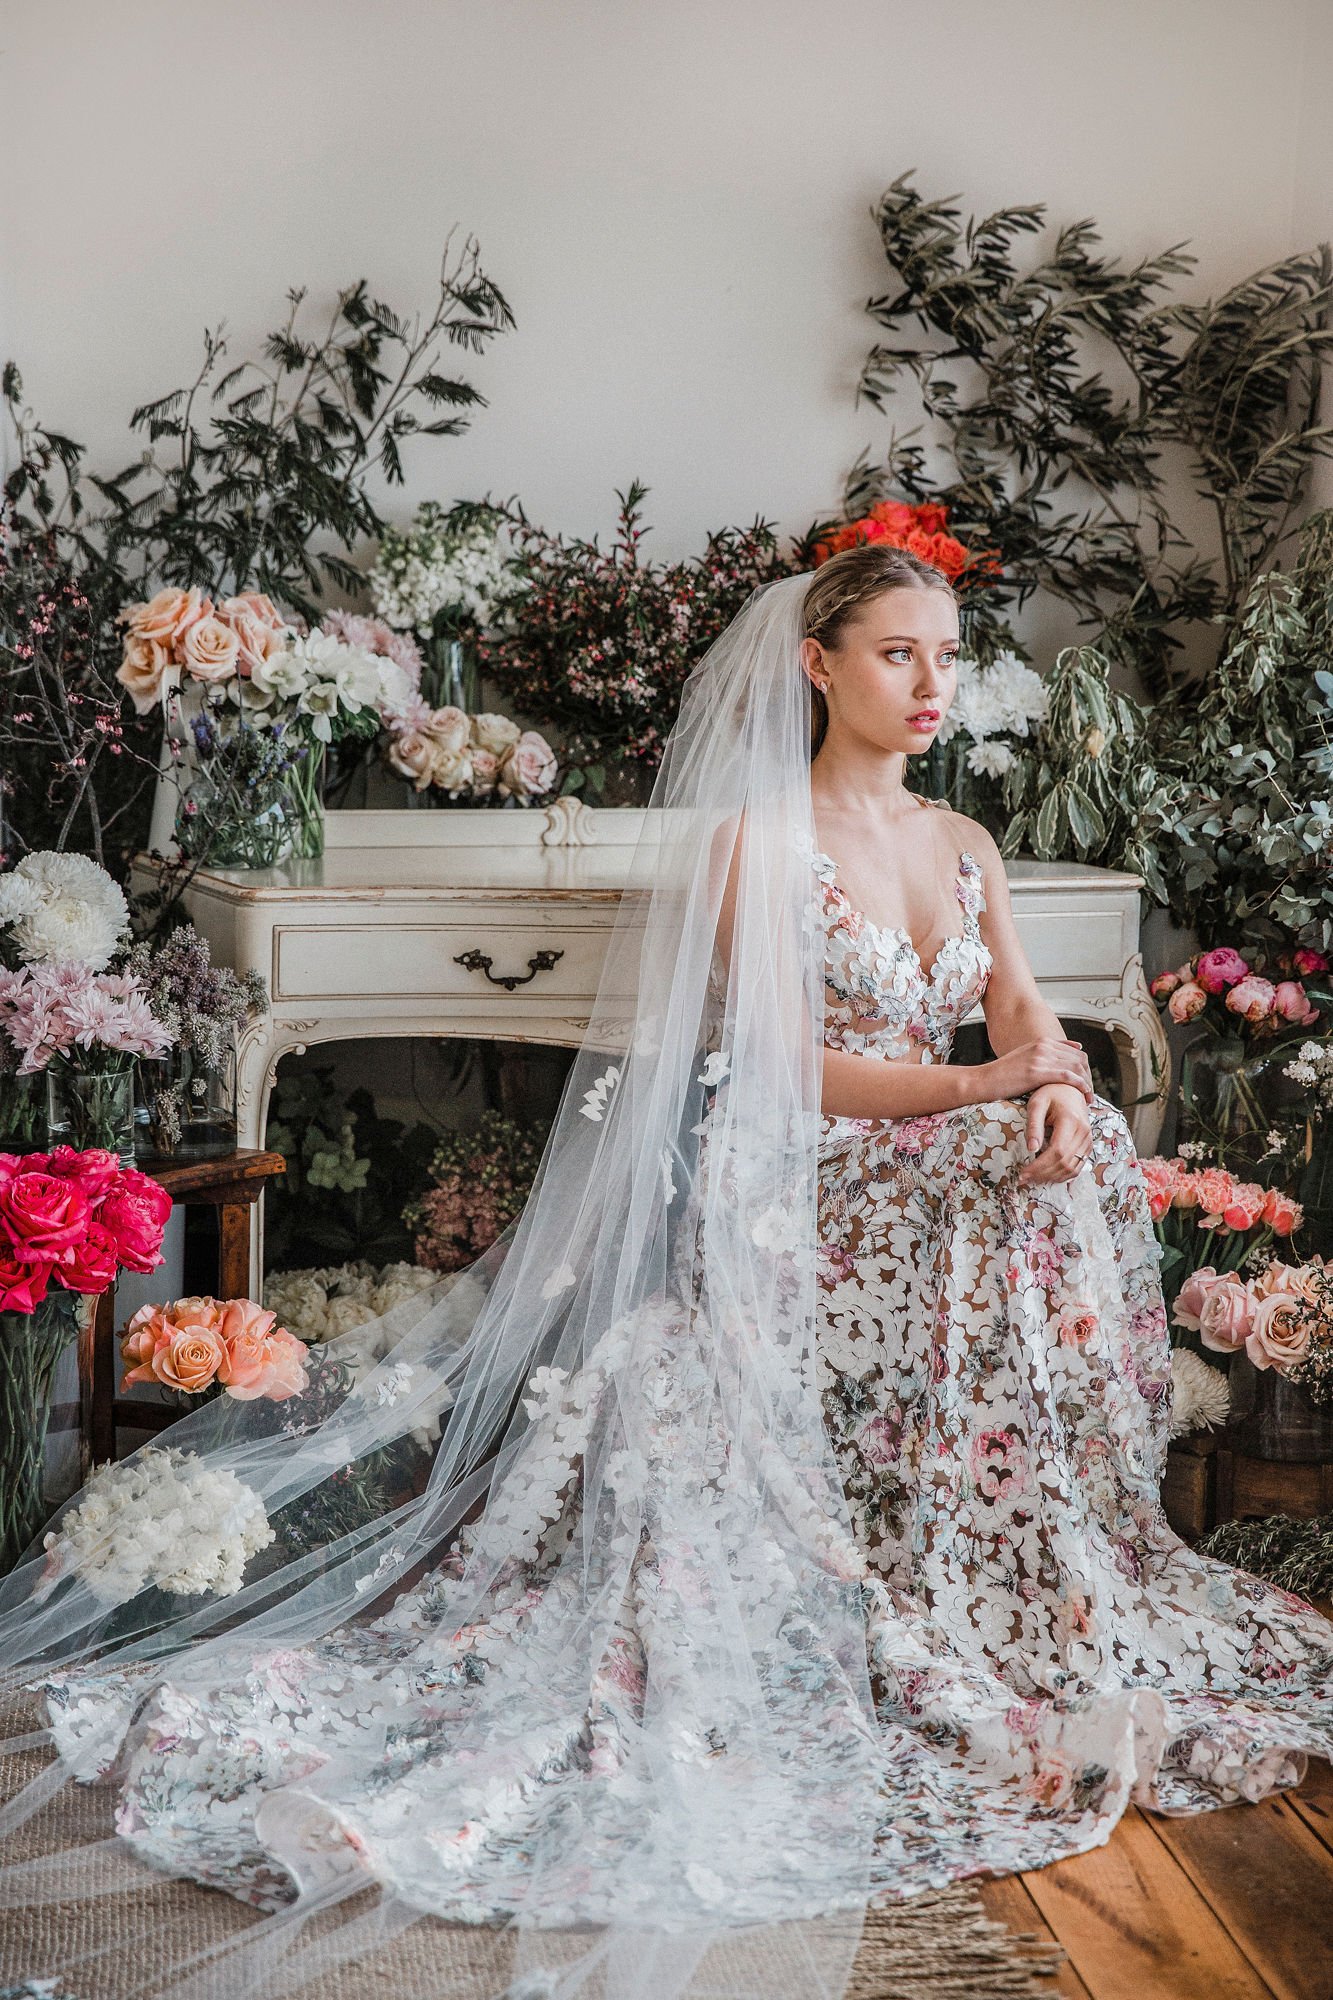 9 Wedding Accessories to Complete Your Bridal Look - Zola Expert Wedding  Advice